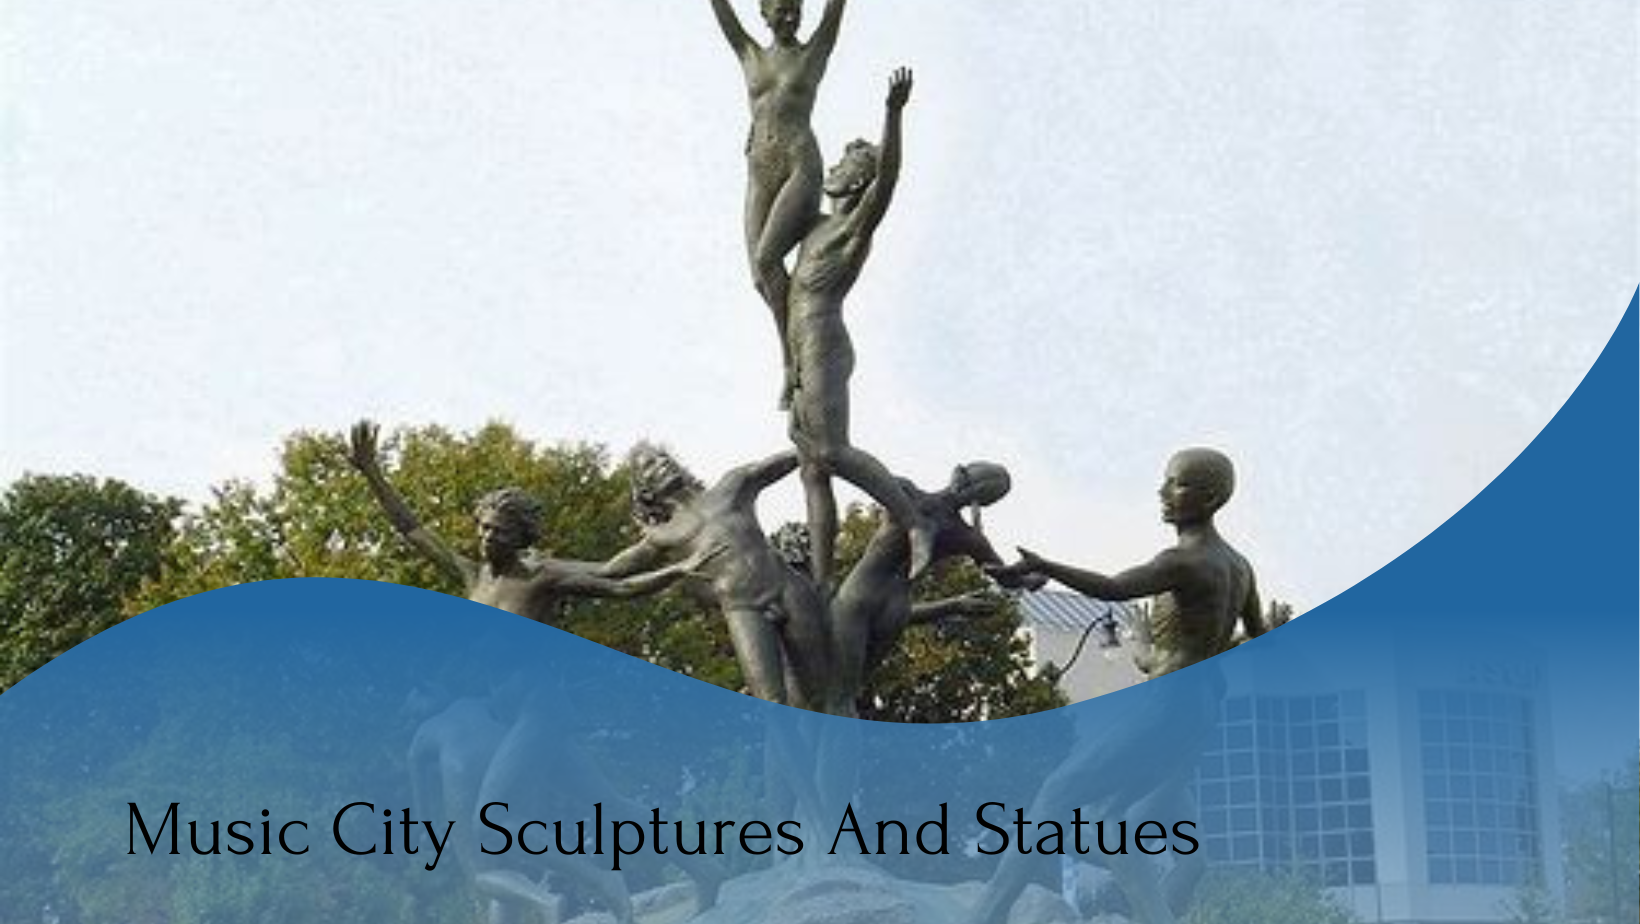 A bronze sculpture depicting six figures in dynamic poses, arranged in an upward spiral. Text at the bottom reads "Music City Sculptures And Statues".